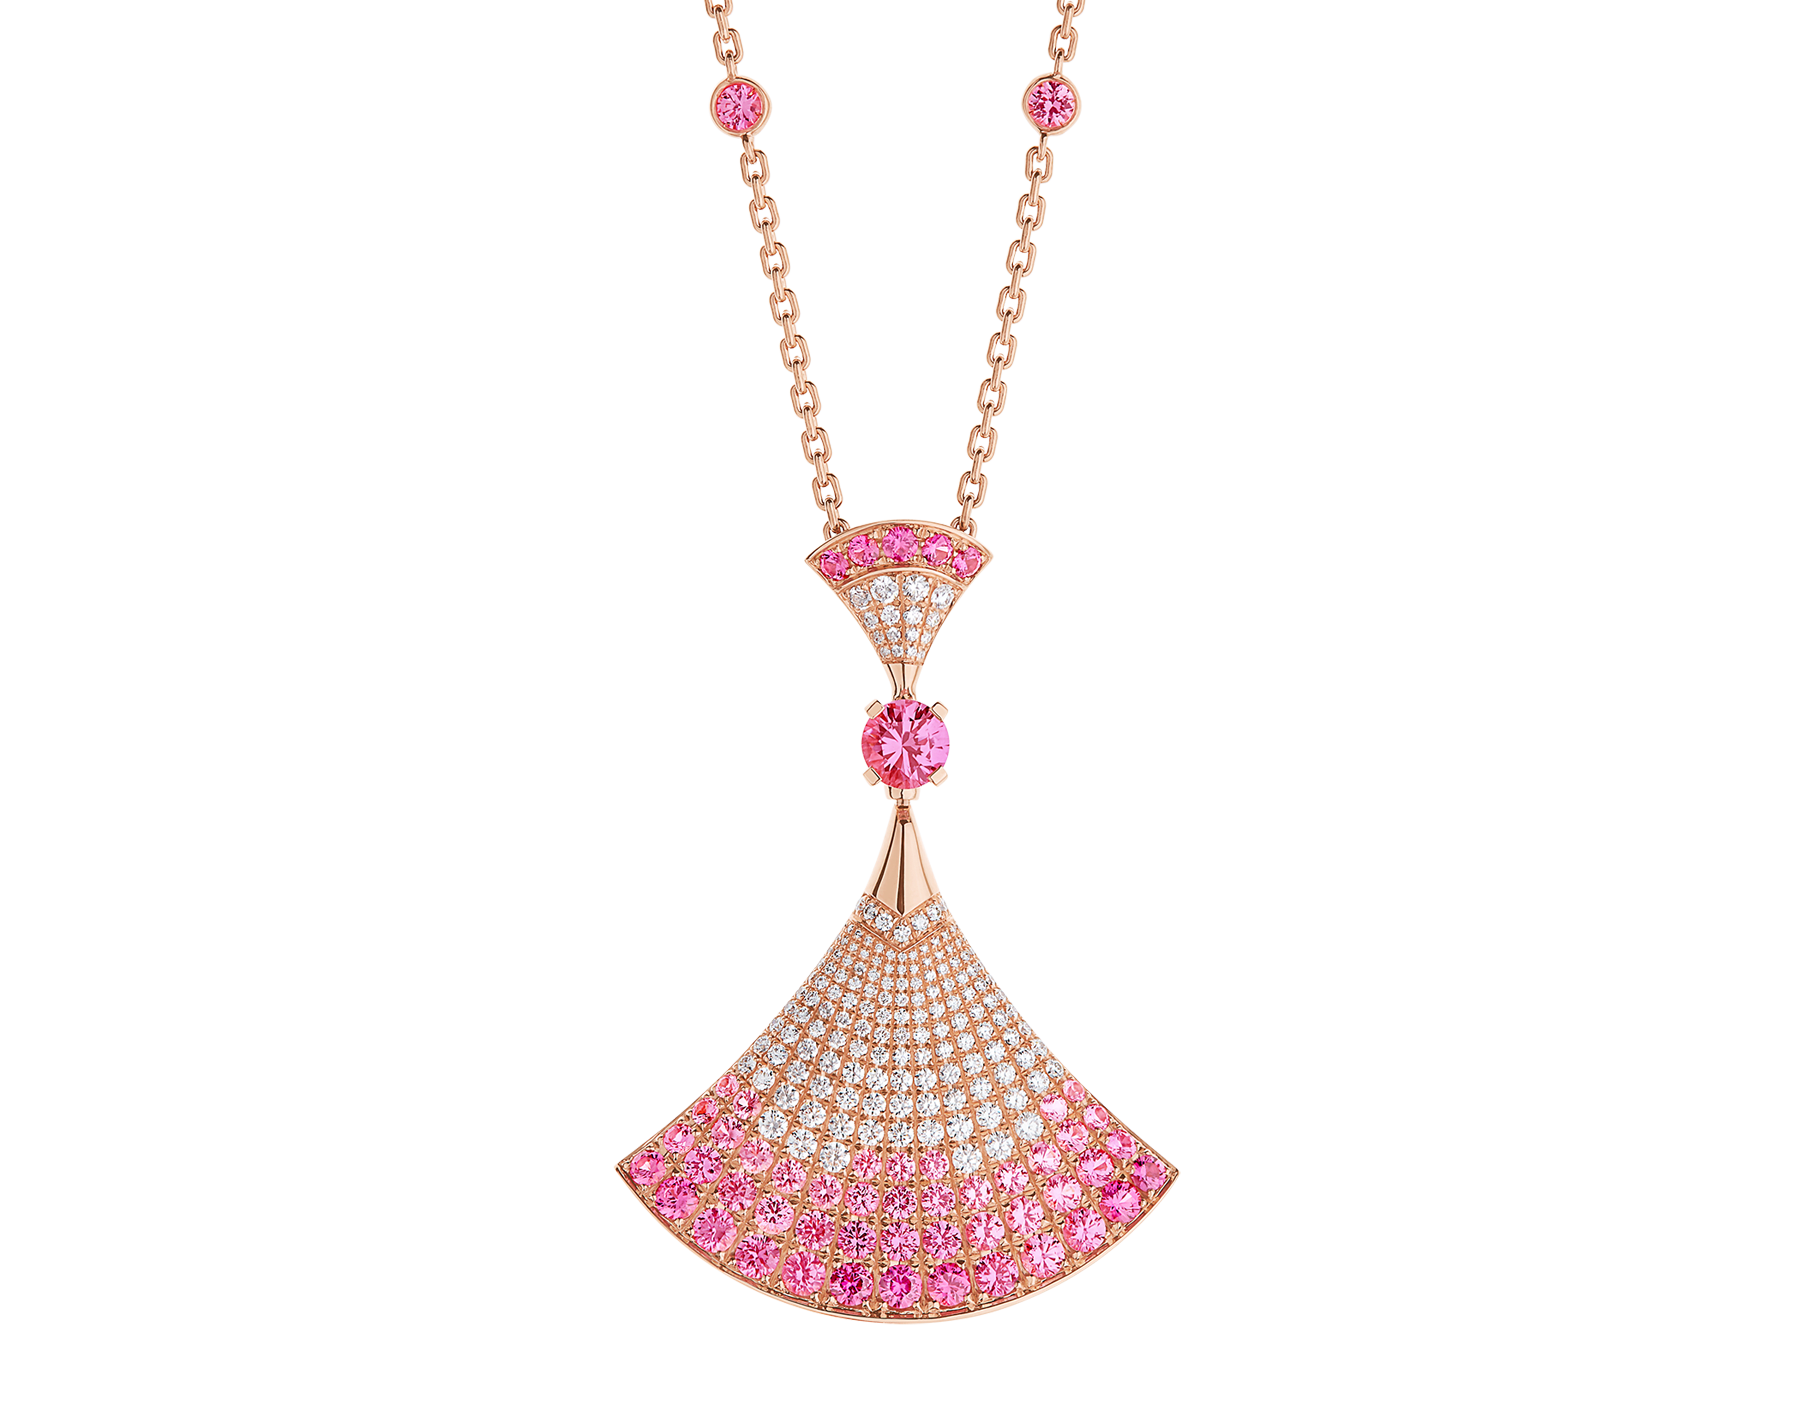 DIVAS' DREAM 18 kt rose gold pendant necklace set with one central and other round pink sapphires (3.53 ct), round rubies (0.81 ct), round (0.16 ct) and pavé (0.85 ct) diamonds 358114 image 1